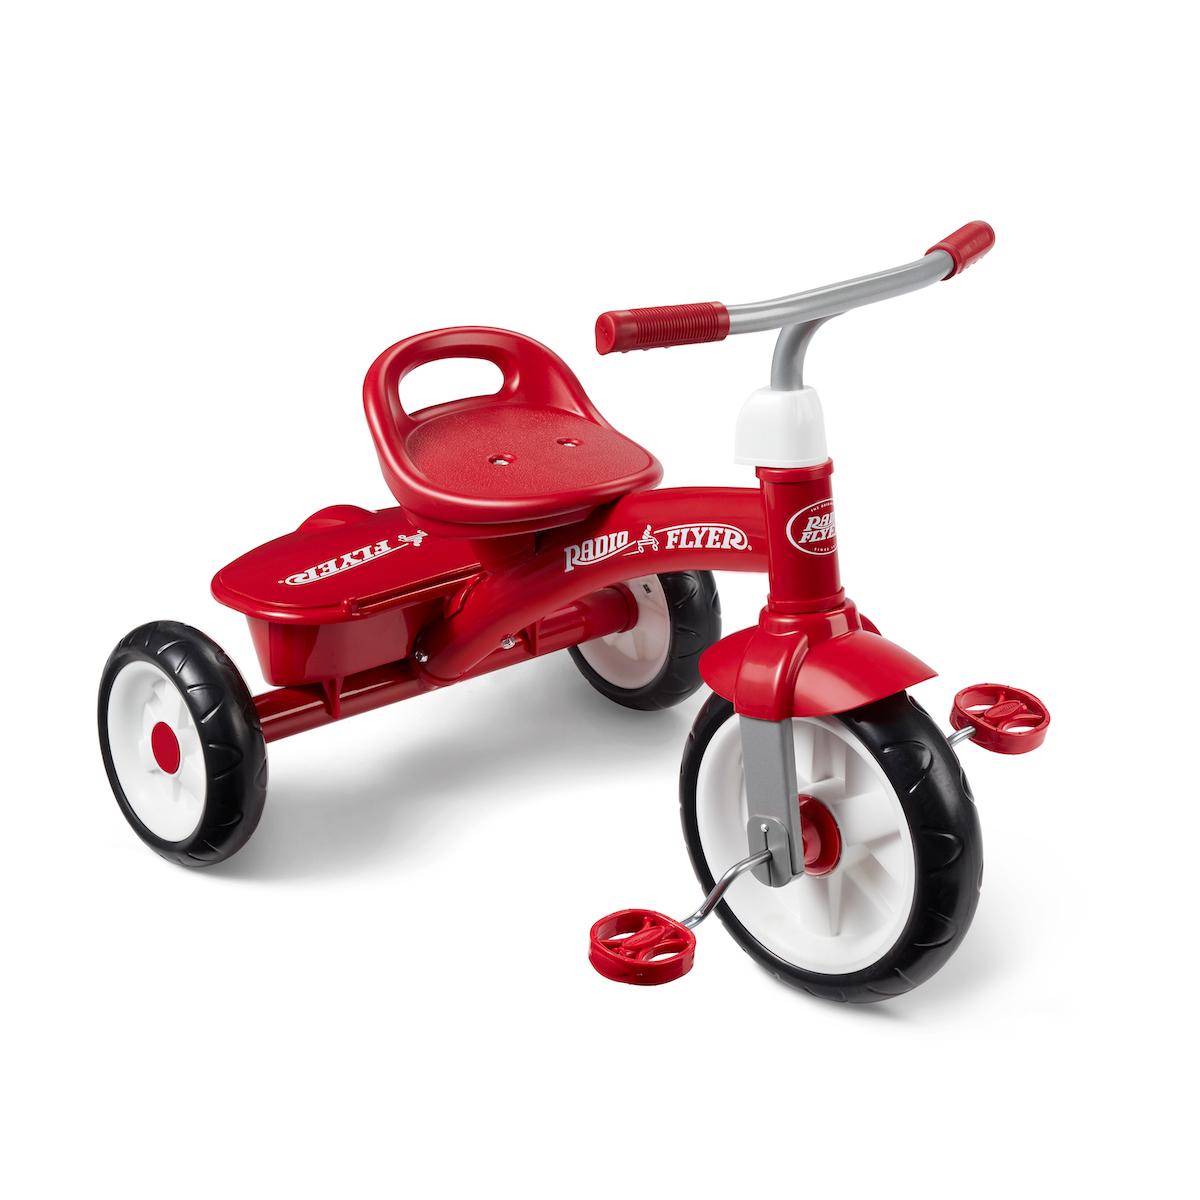 Radio Flyer Red Rider Trike Red Color